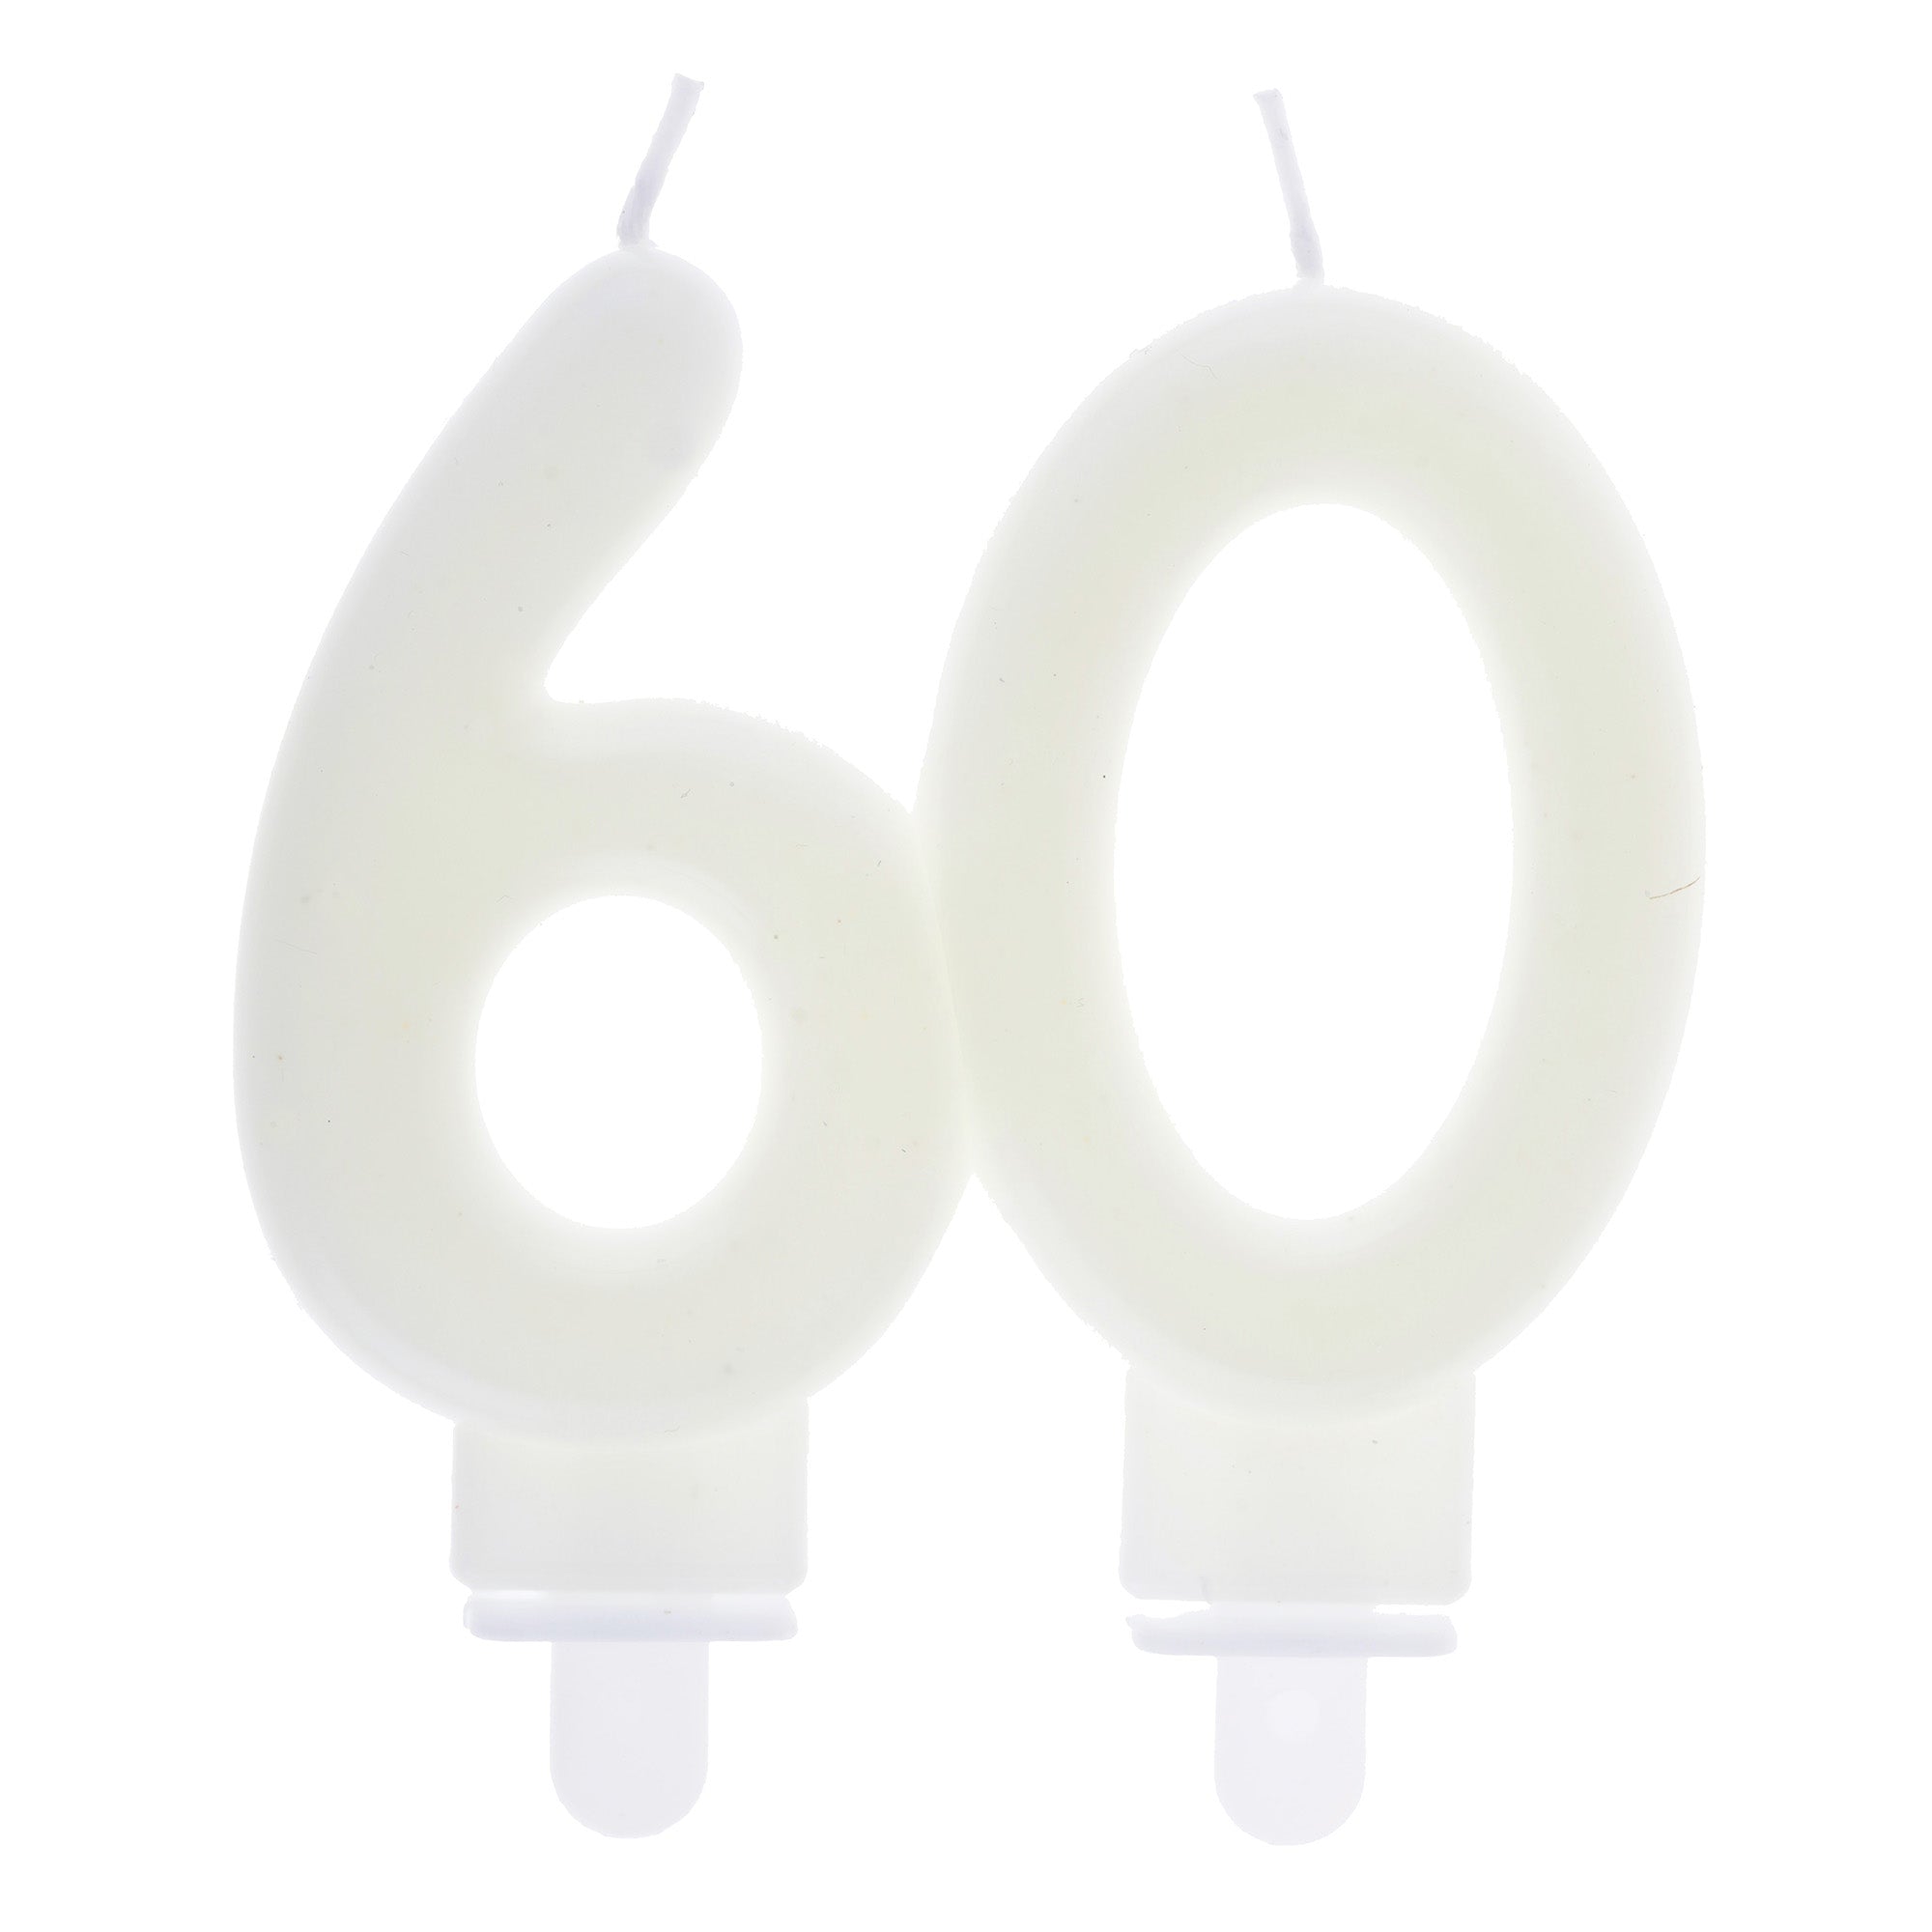 Age 60 Birthday Candle Phosphorescent 3x3.5in